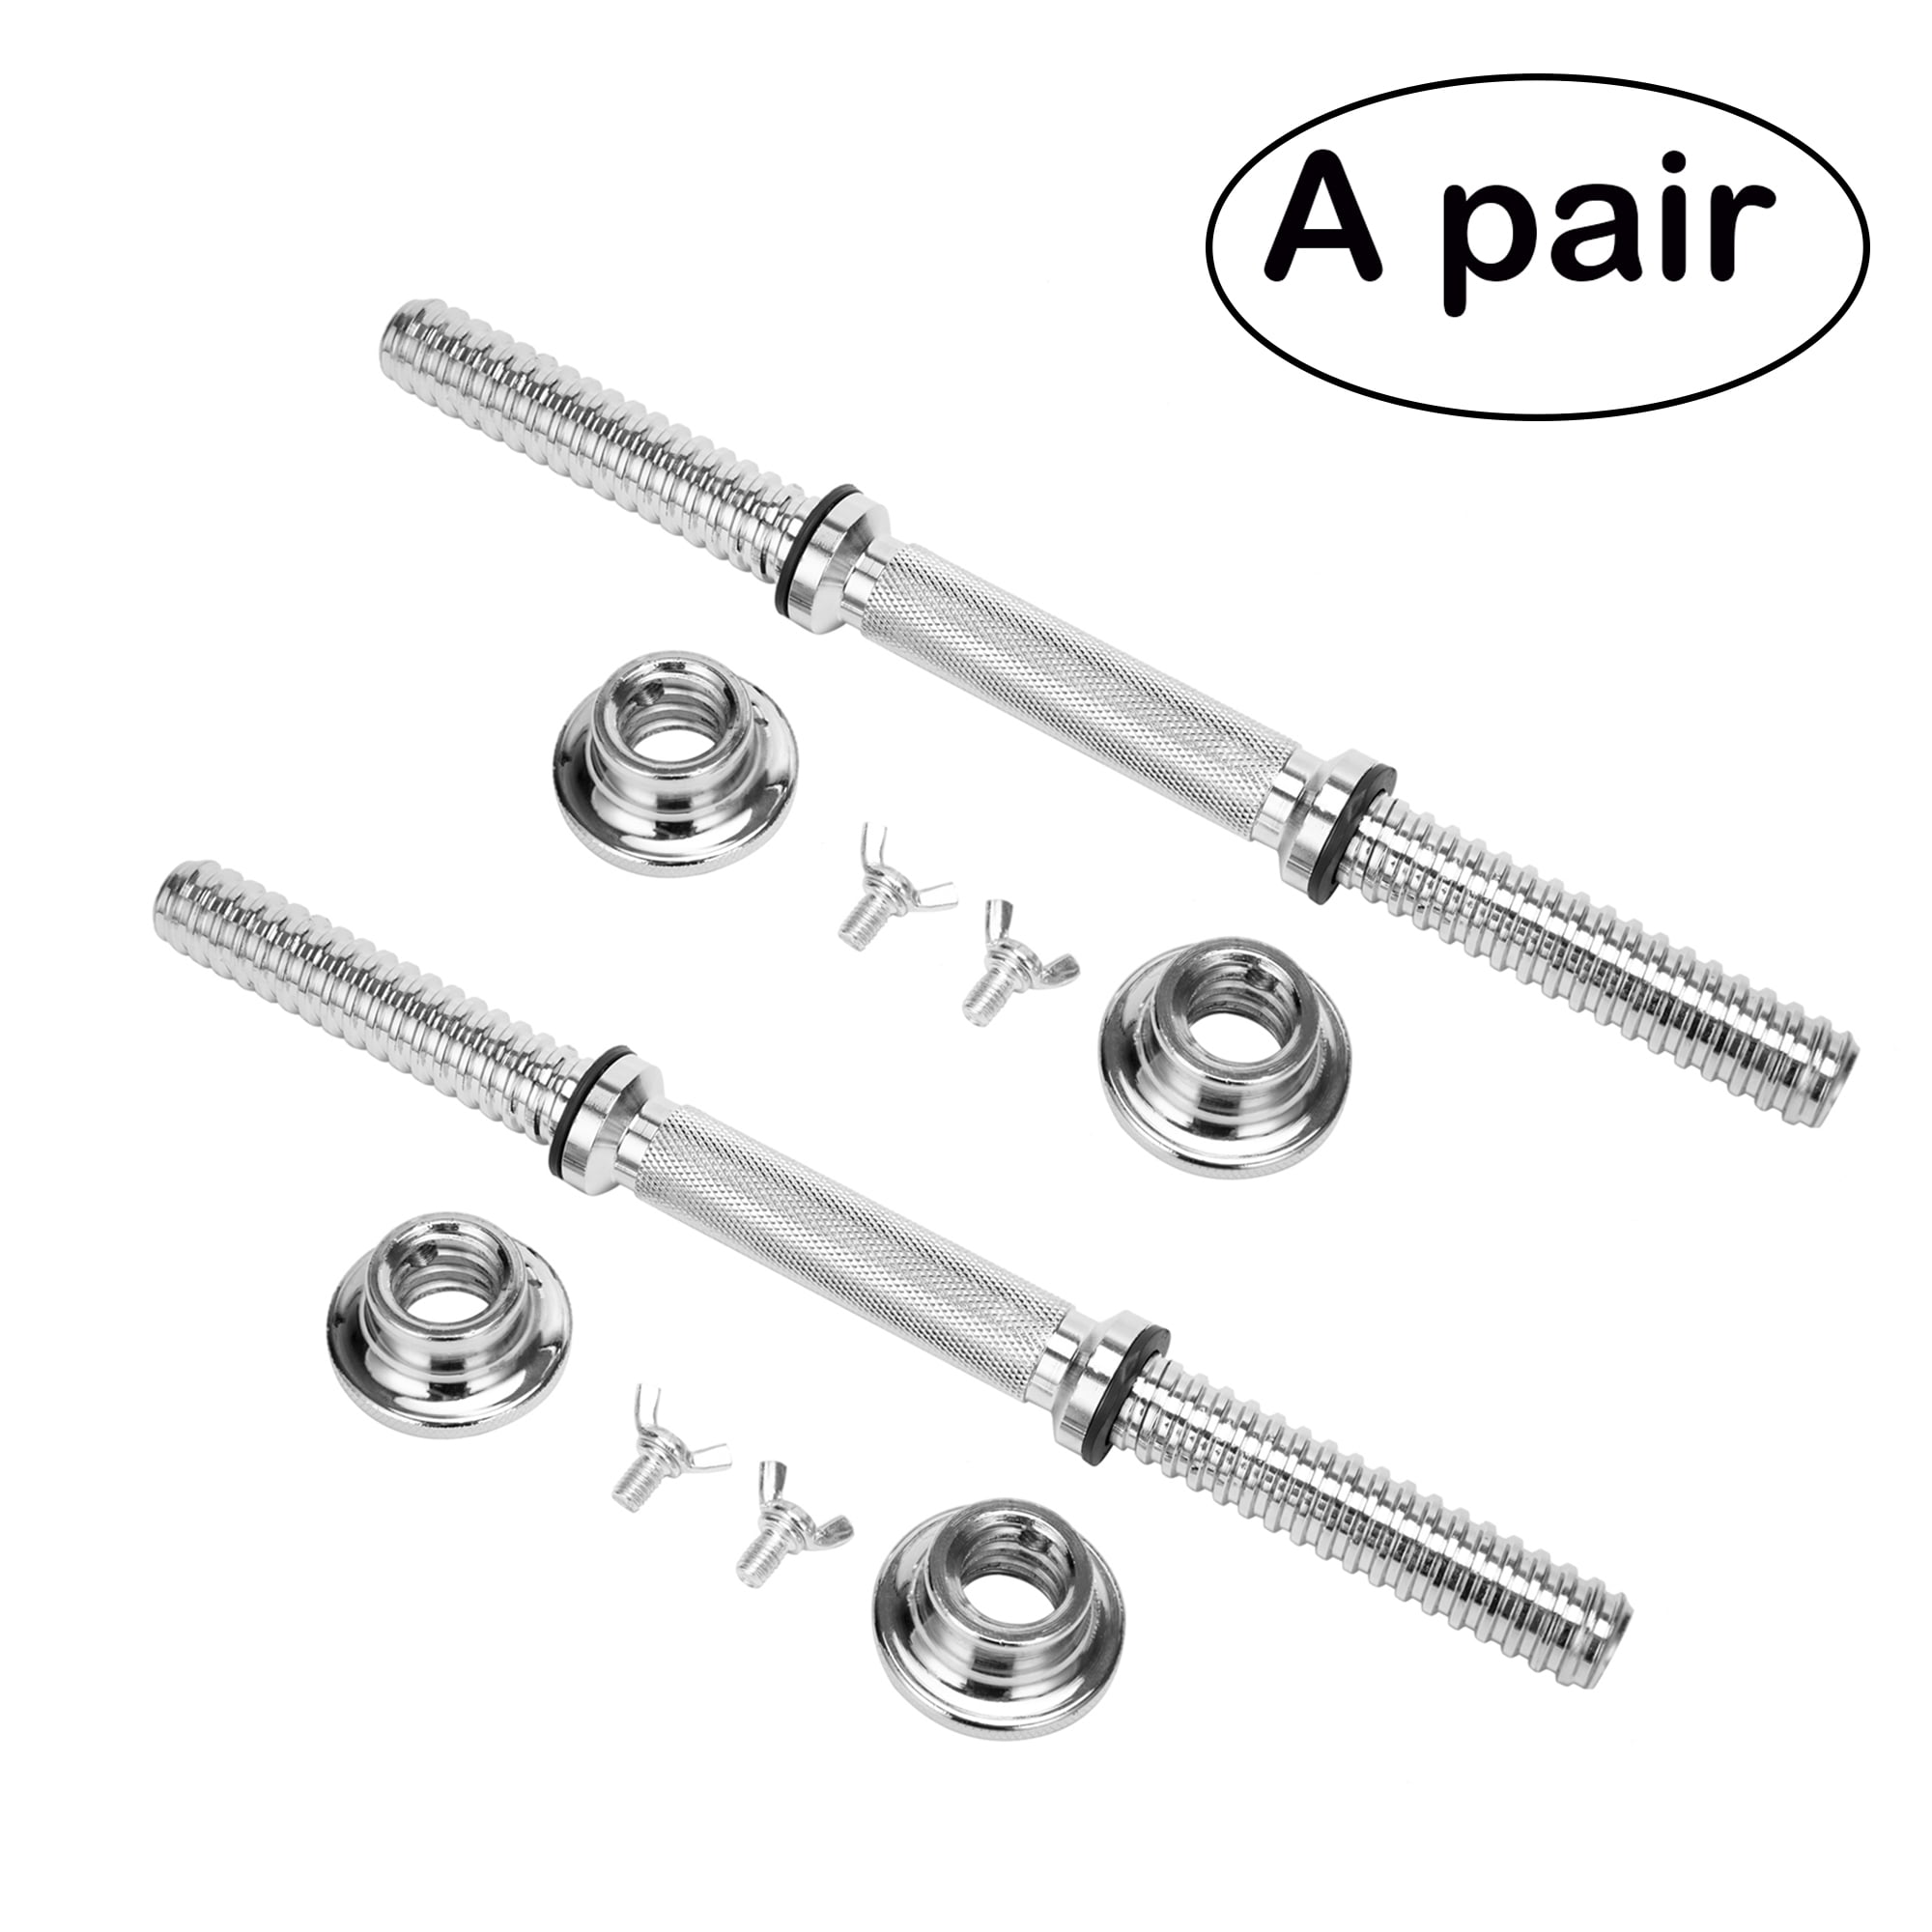 Adjustable Dumbbell Bar 1 inch Threaded Barbell Handles Home Gym Fitness 17.7" 